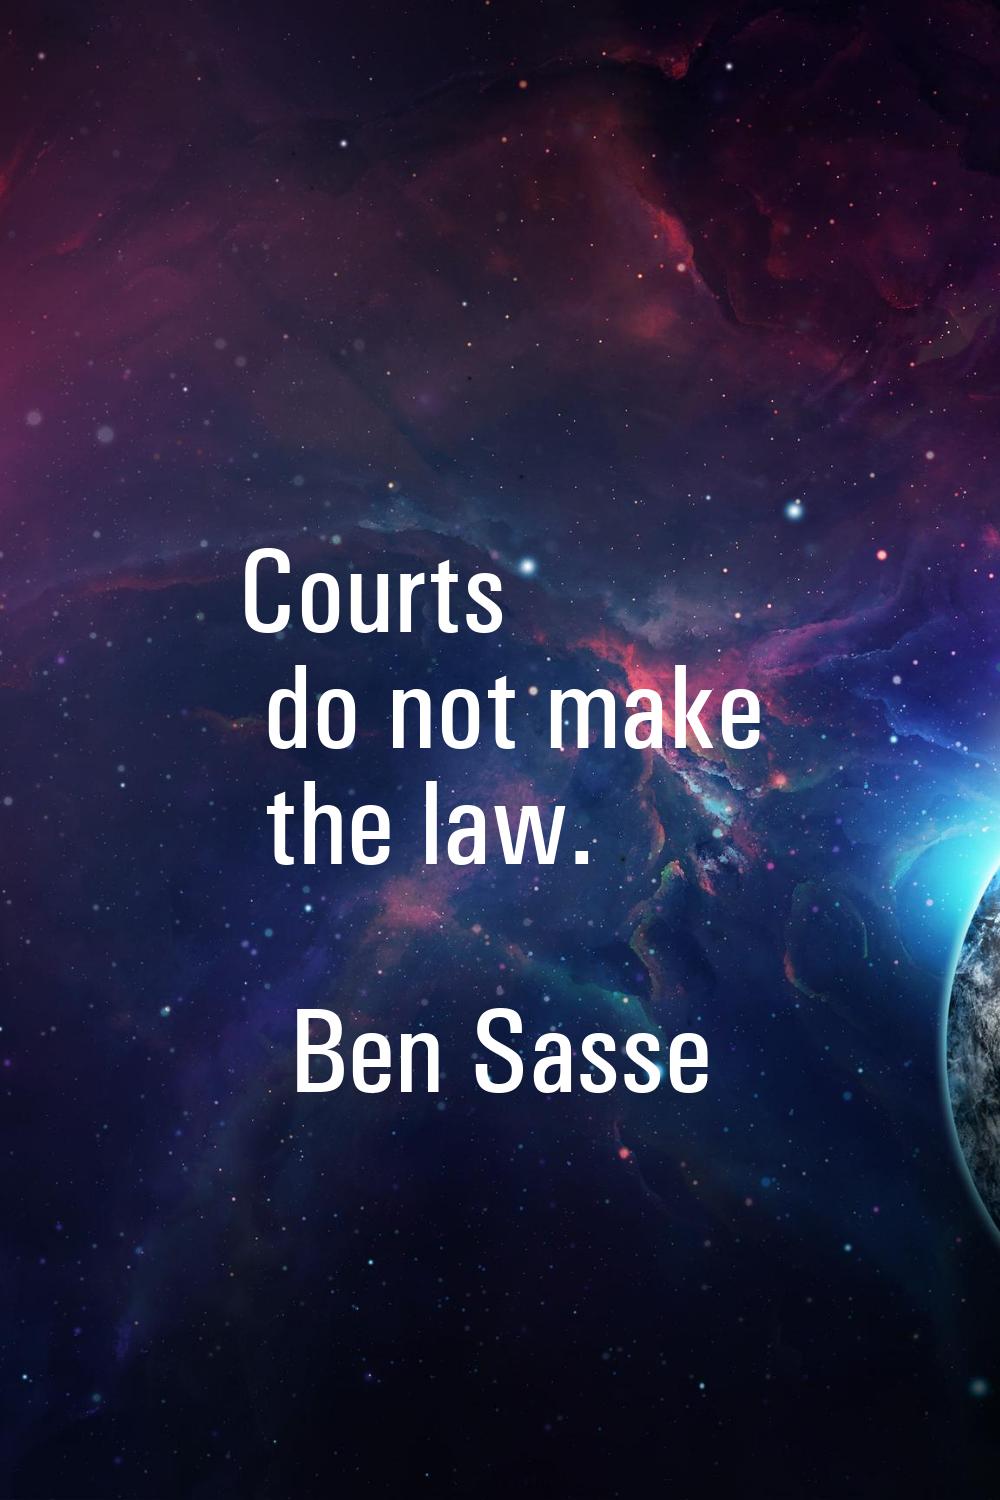 Courts do not make the law.